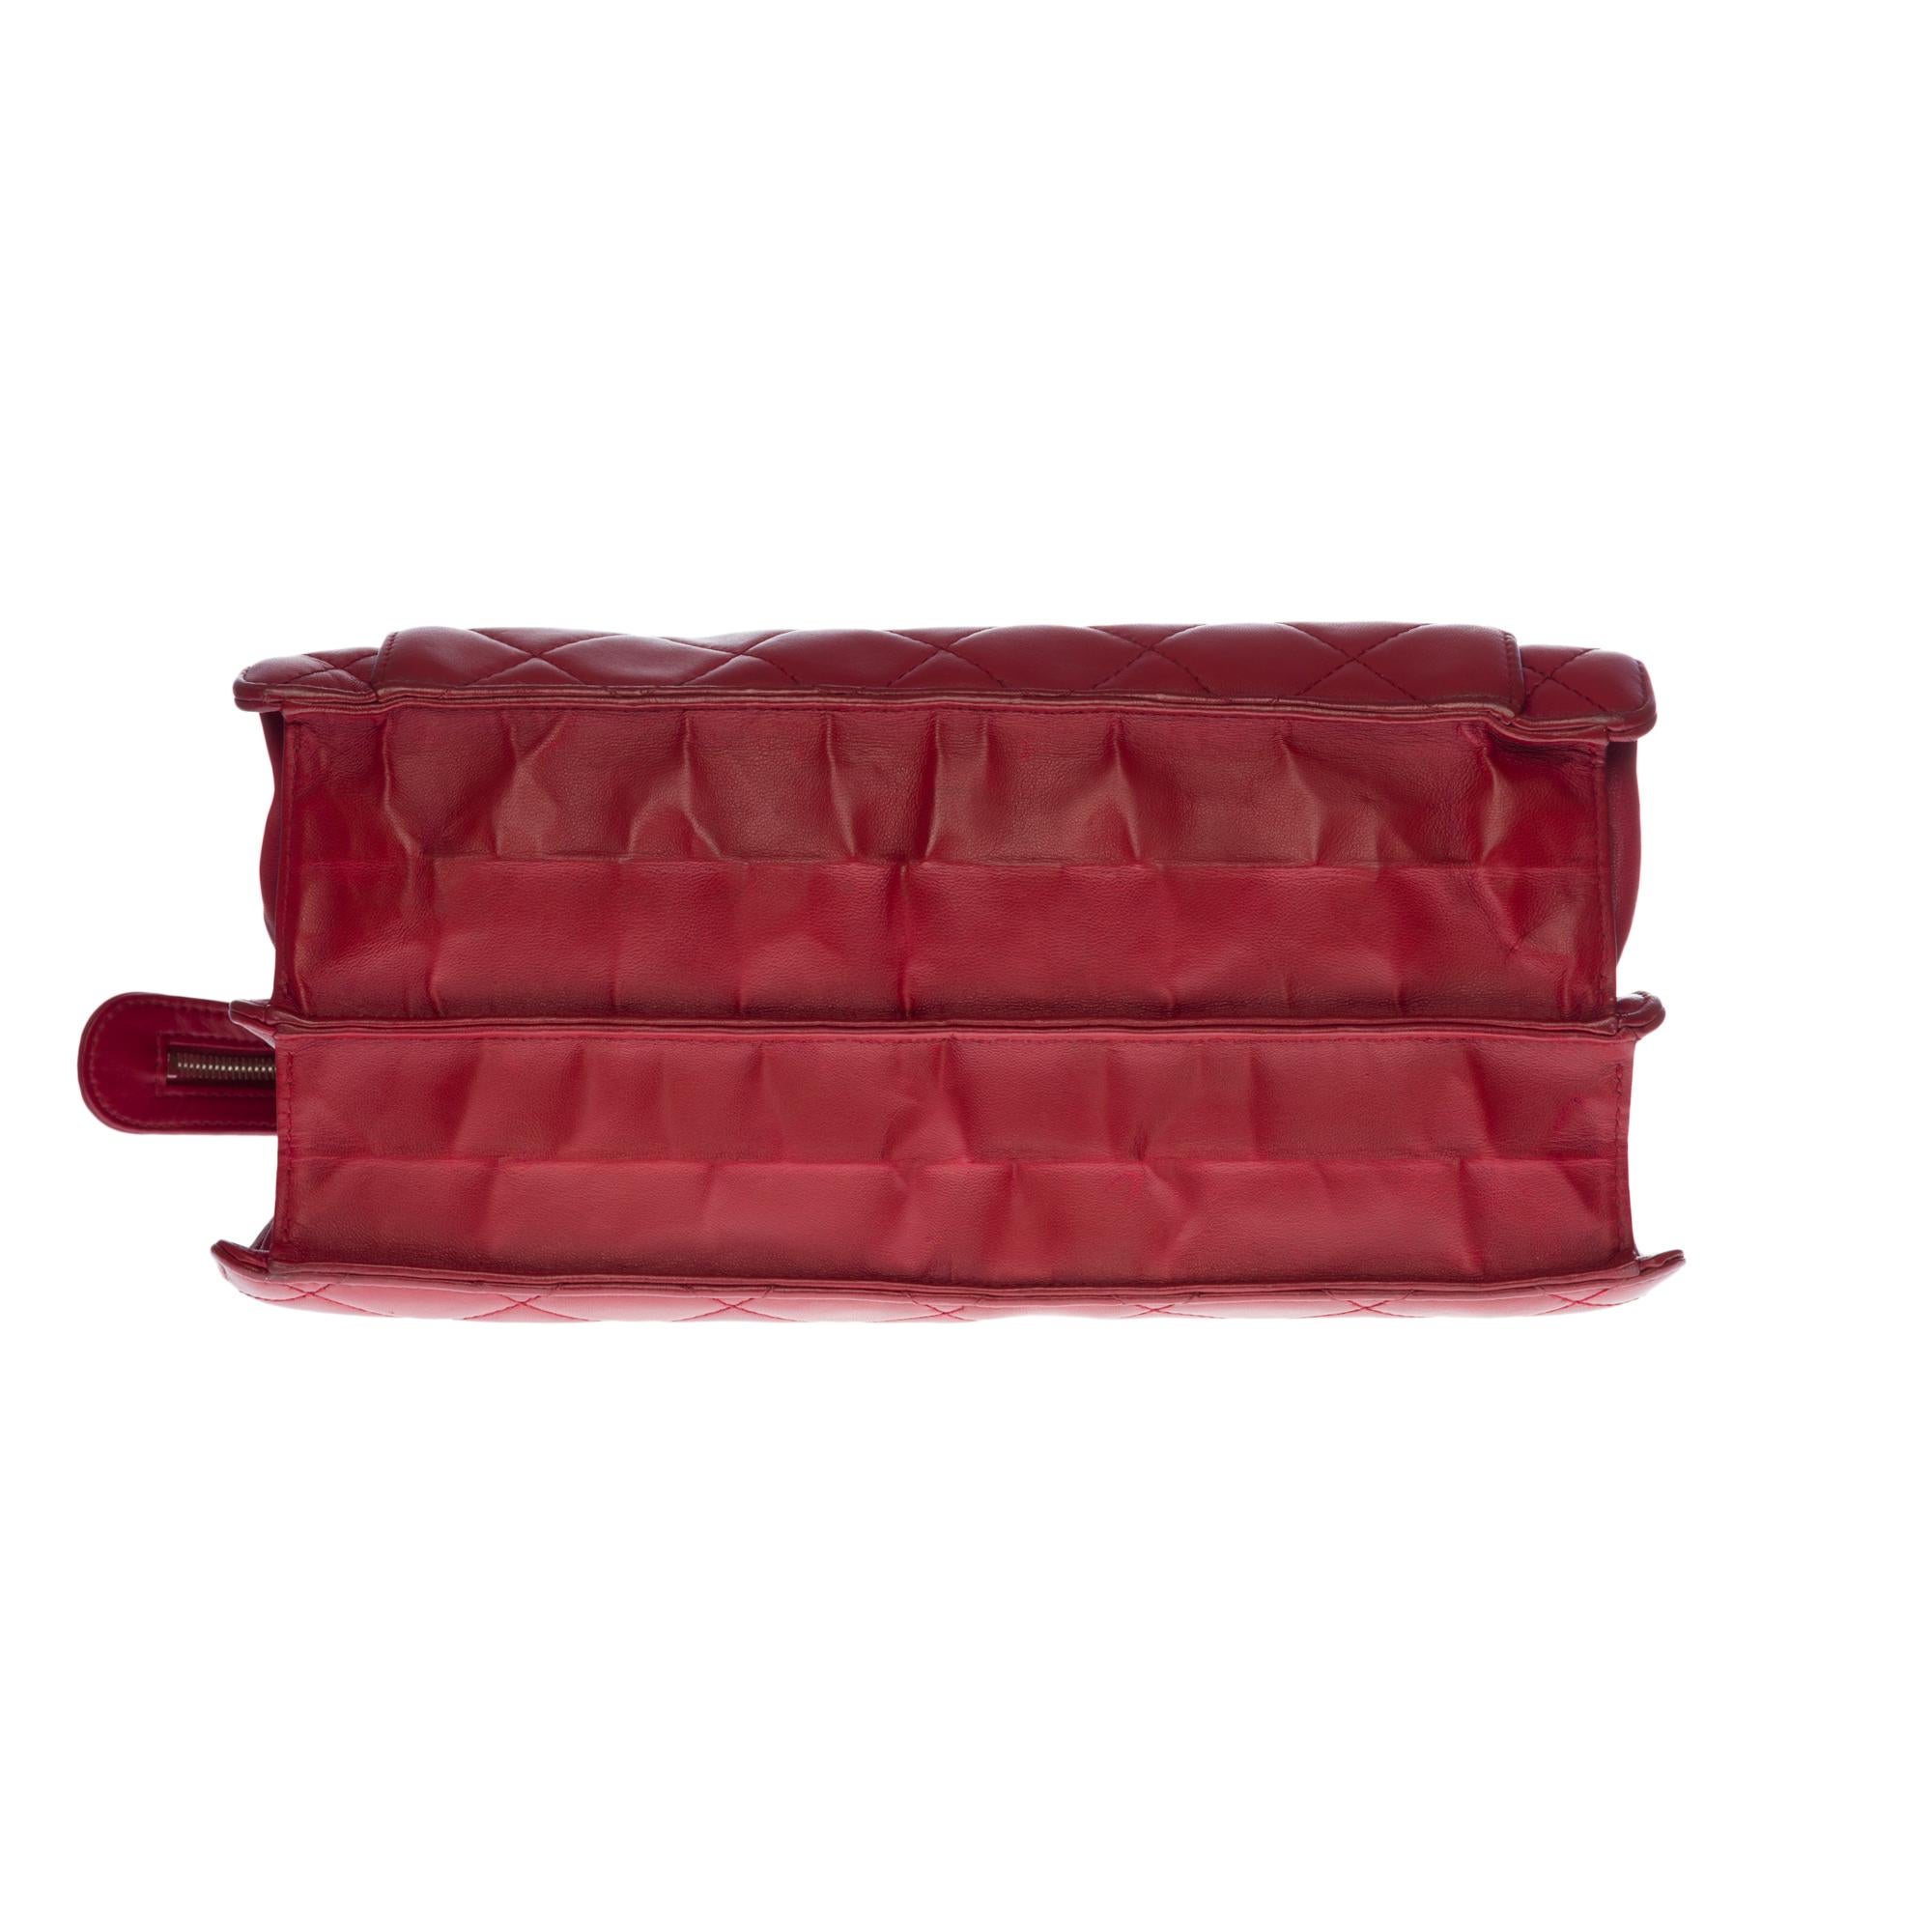 Chanel Classic 2.55 Maxi shoulder bag in red quilted leather, SHW For Sale 6